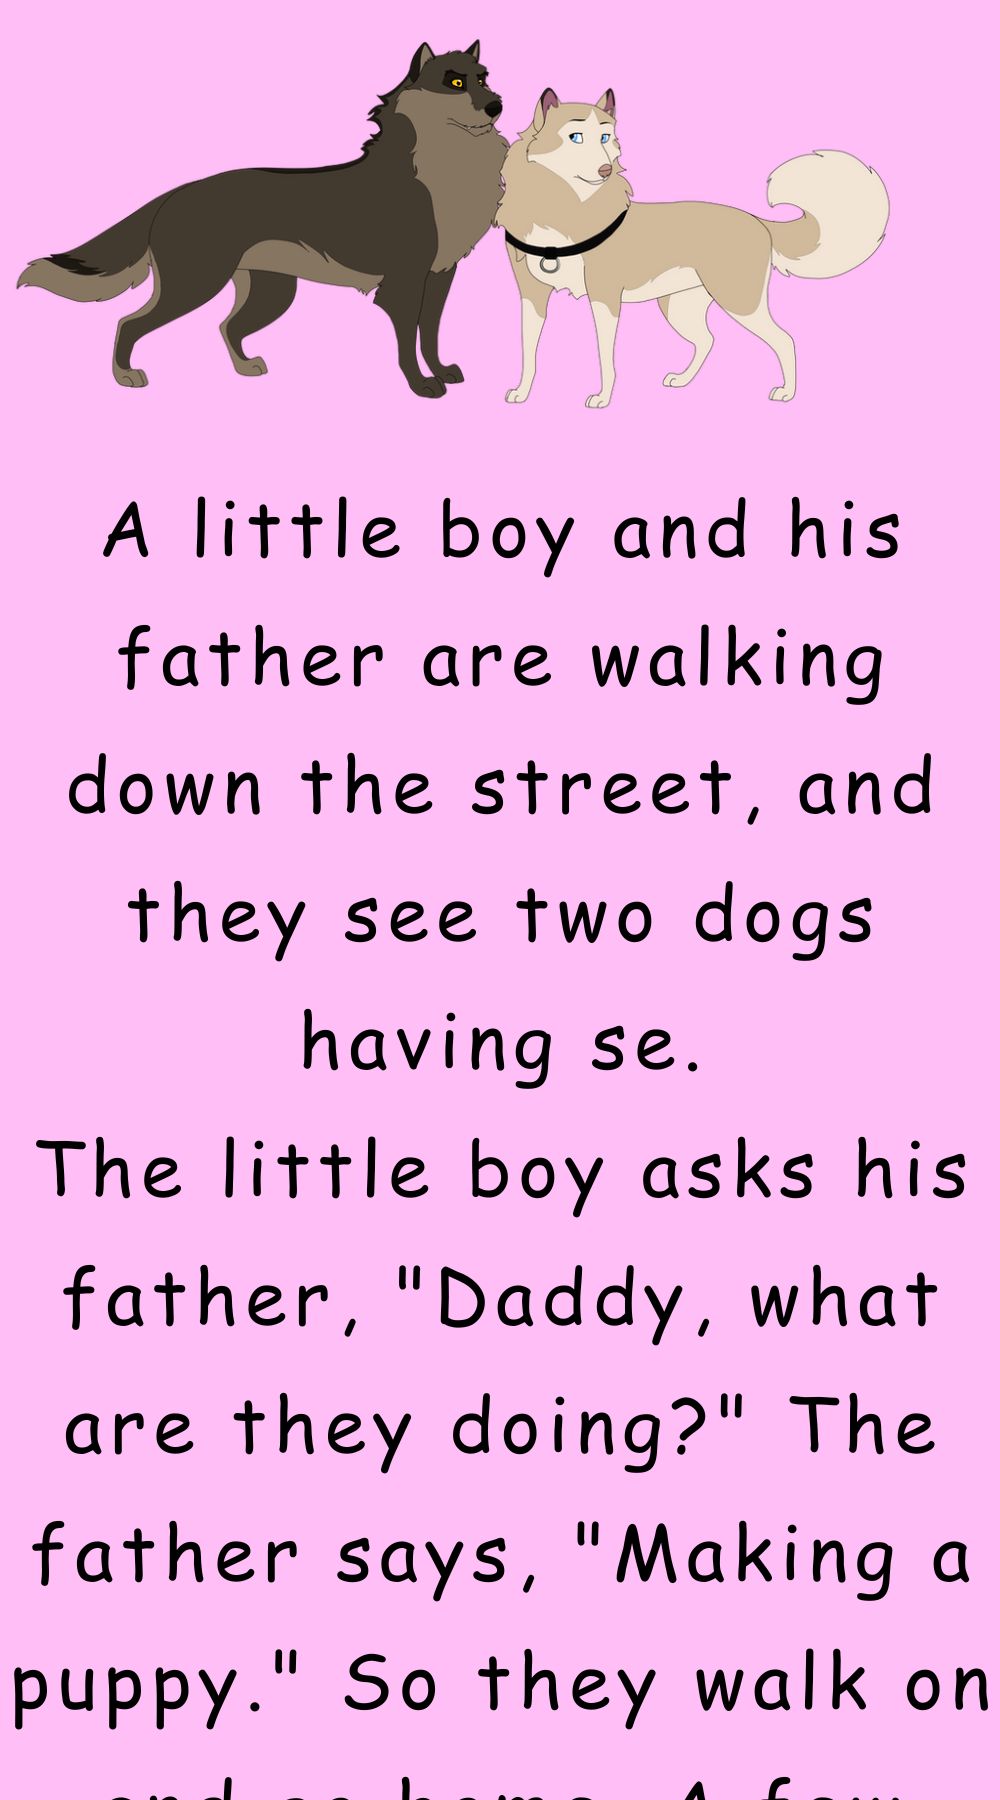 A little boy and his father are walking down the street